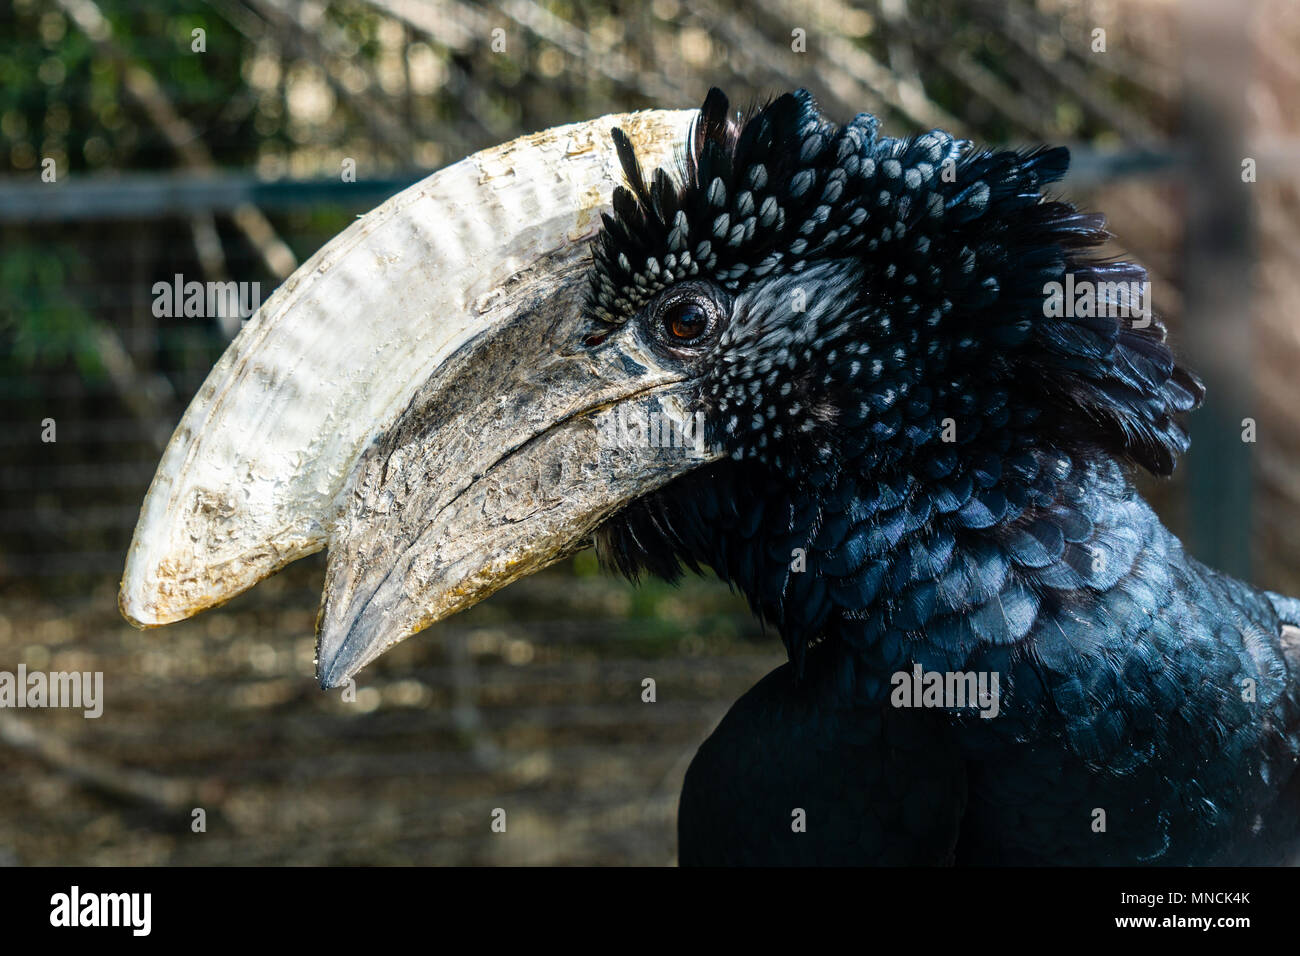 Silvery-cheeked hornbill in the zoo at day time. Stock Photo